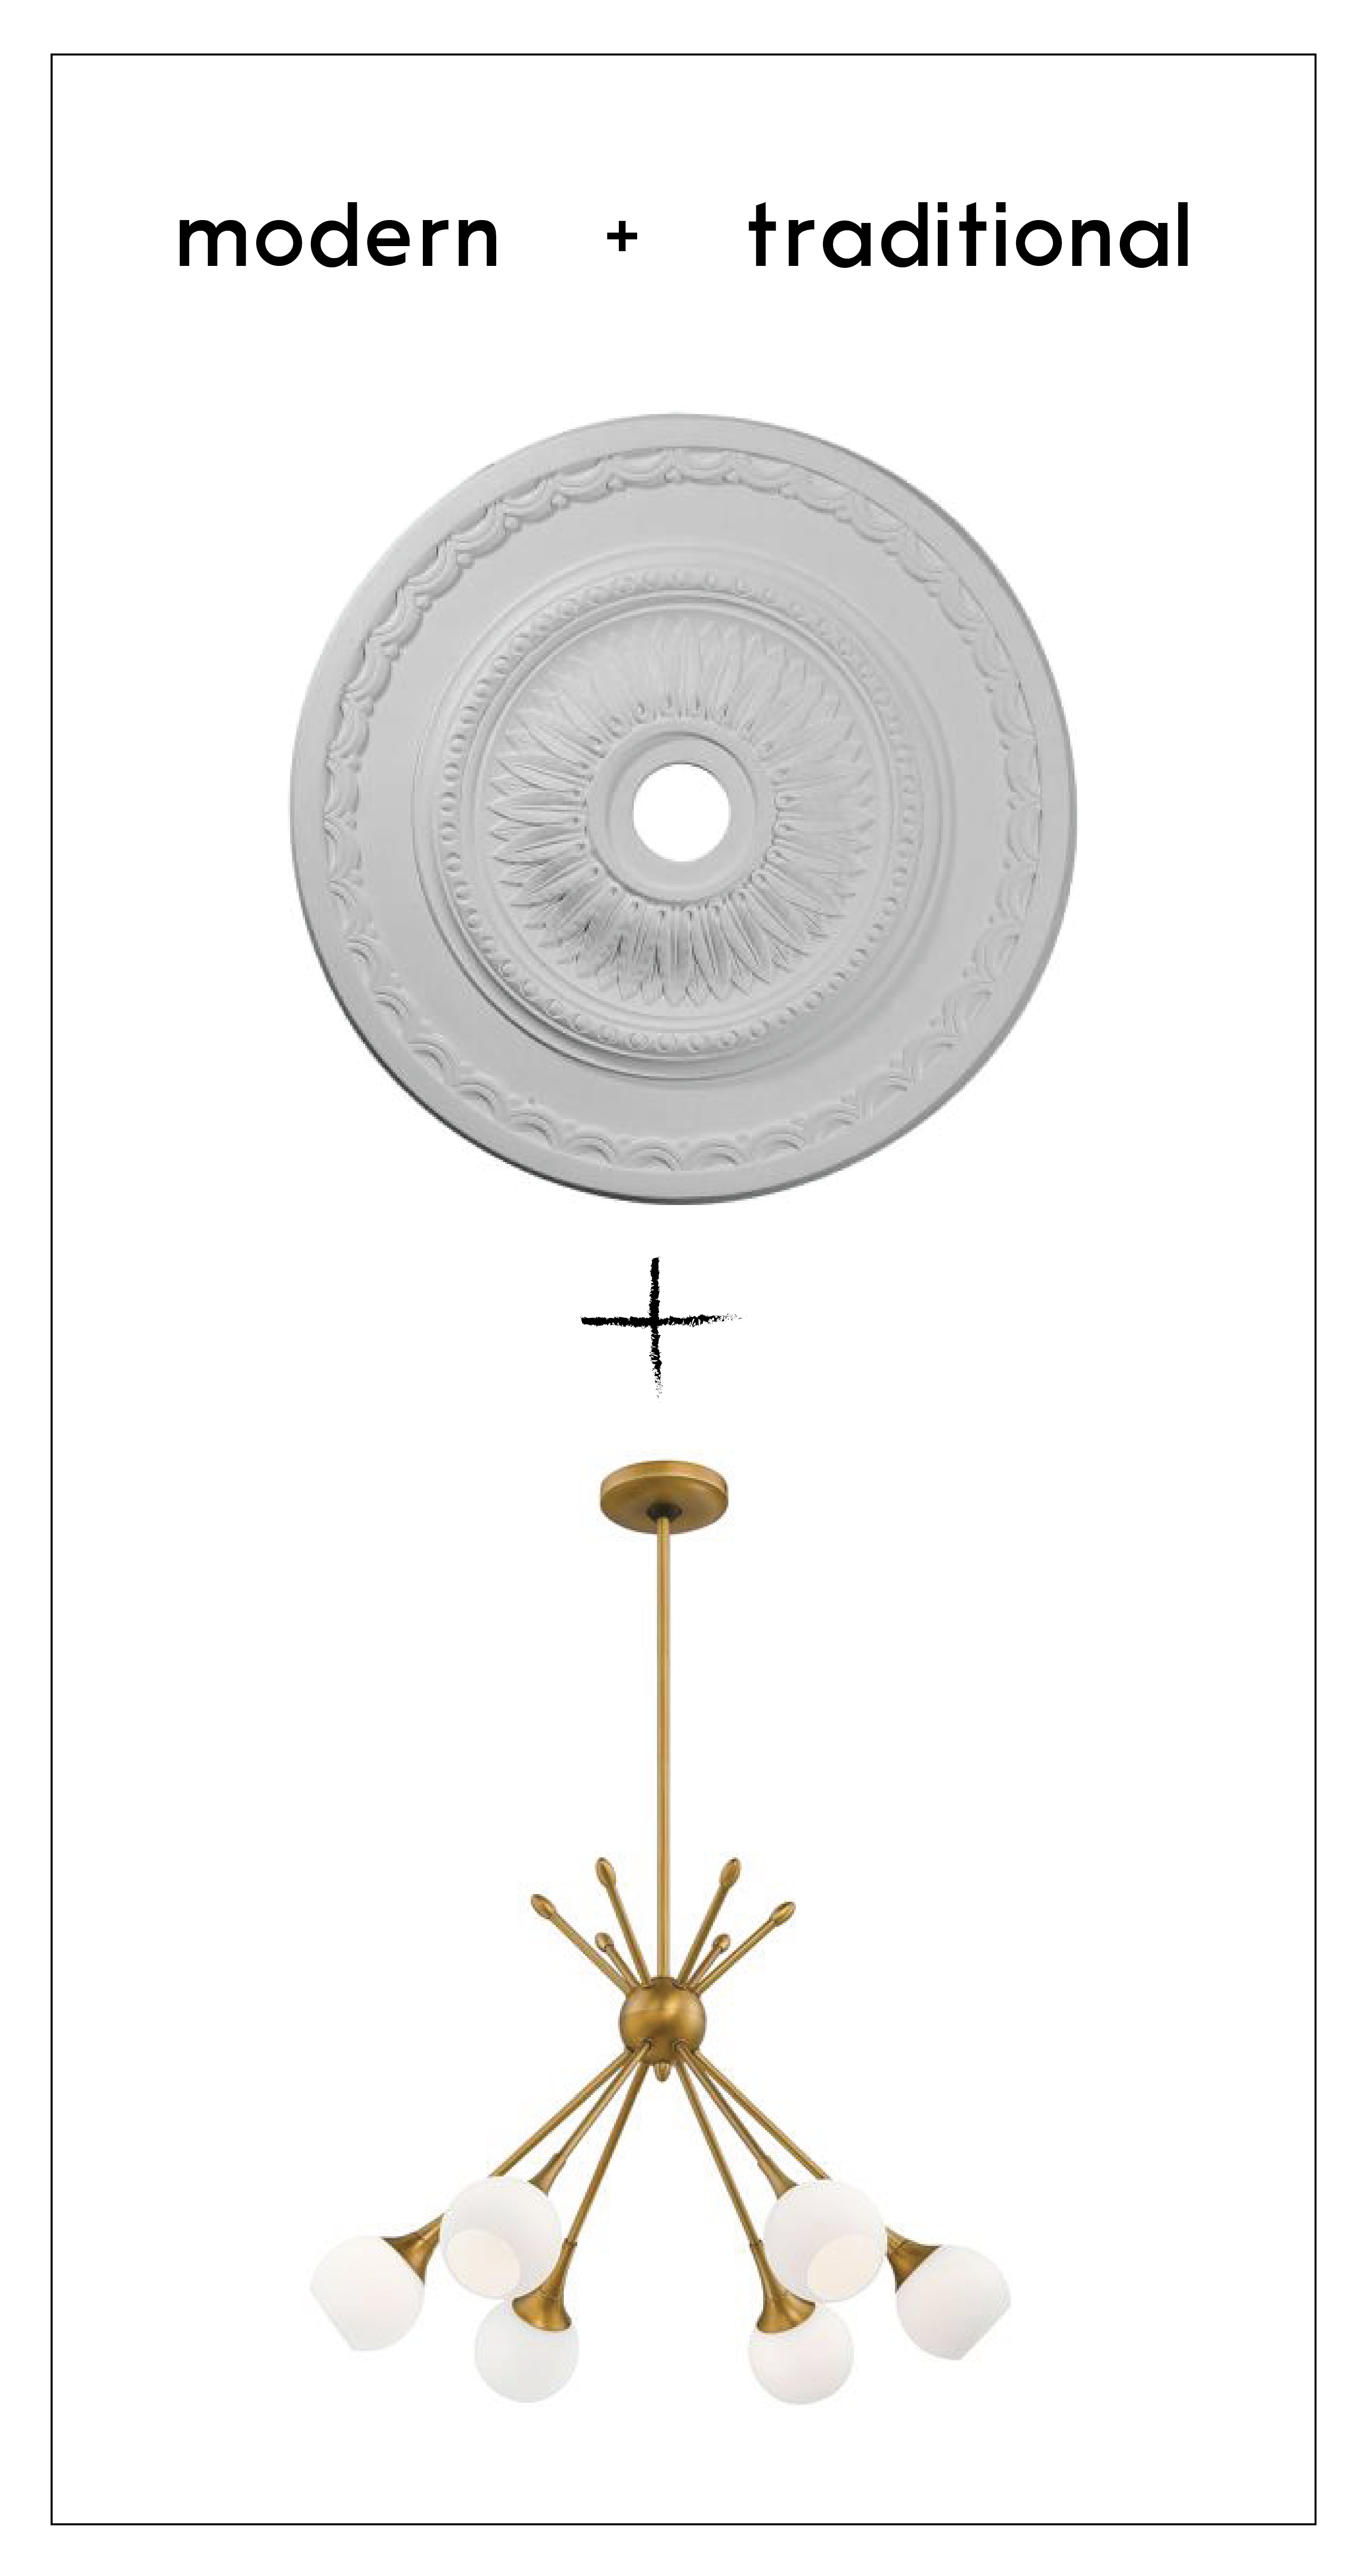 How To Center A Light Fixture Using A Ceiling Medallion Francois